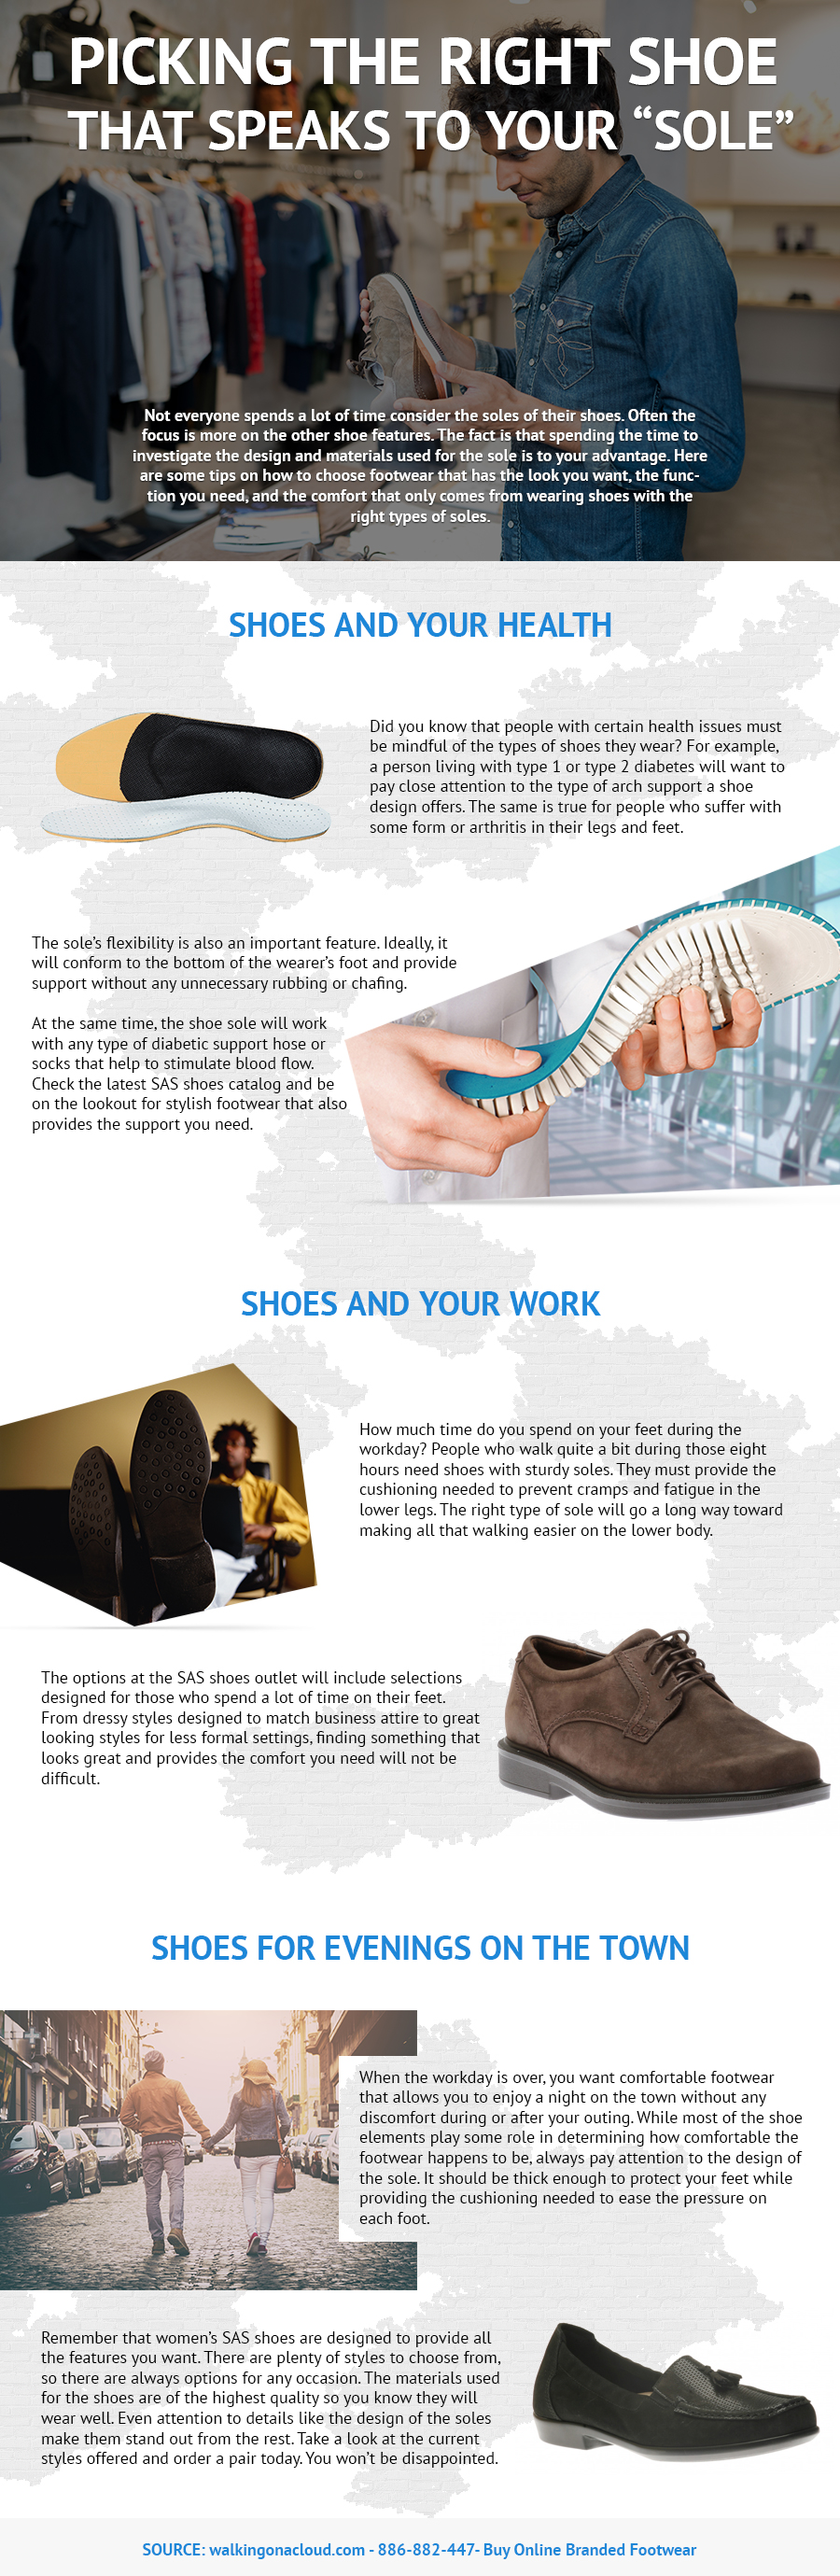 Picking-Right-Shoe-That-Speaks-to-Your-Sole